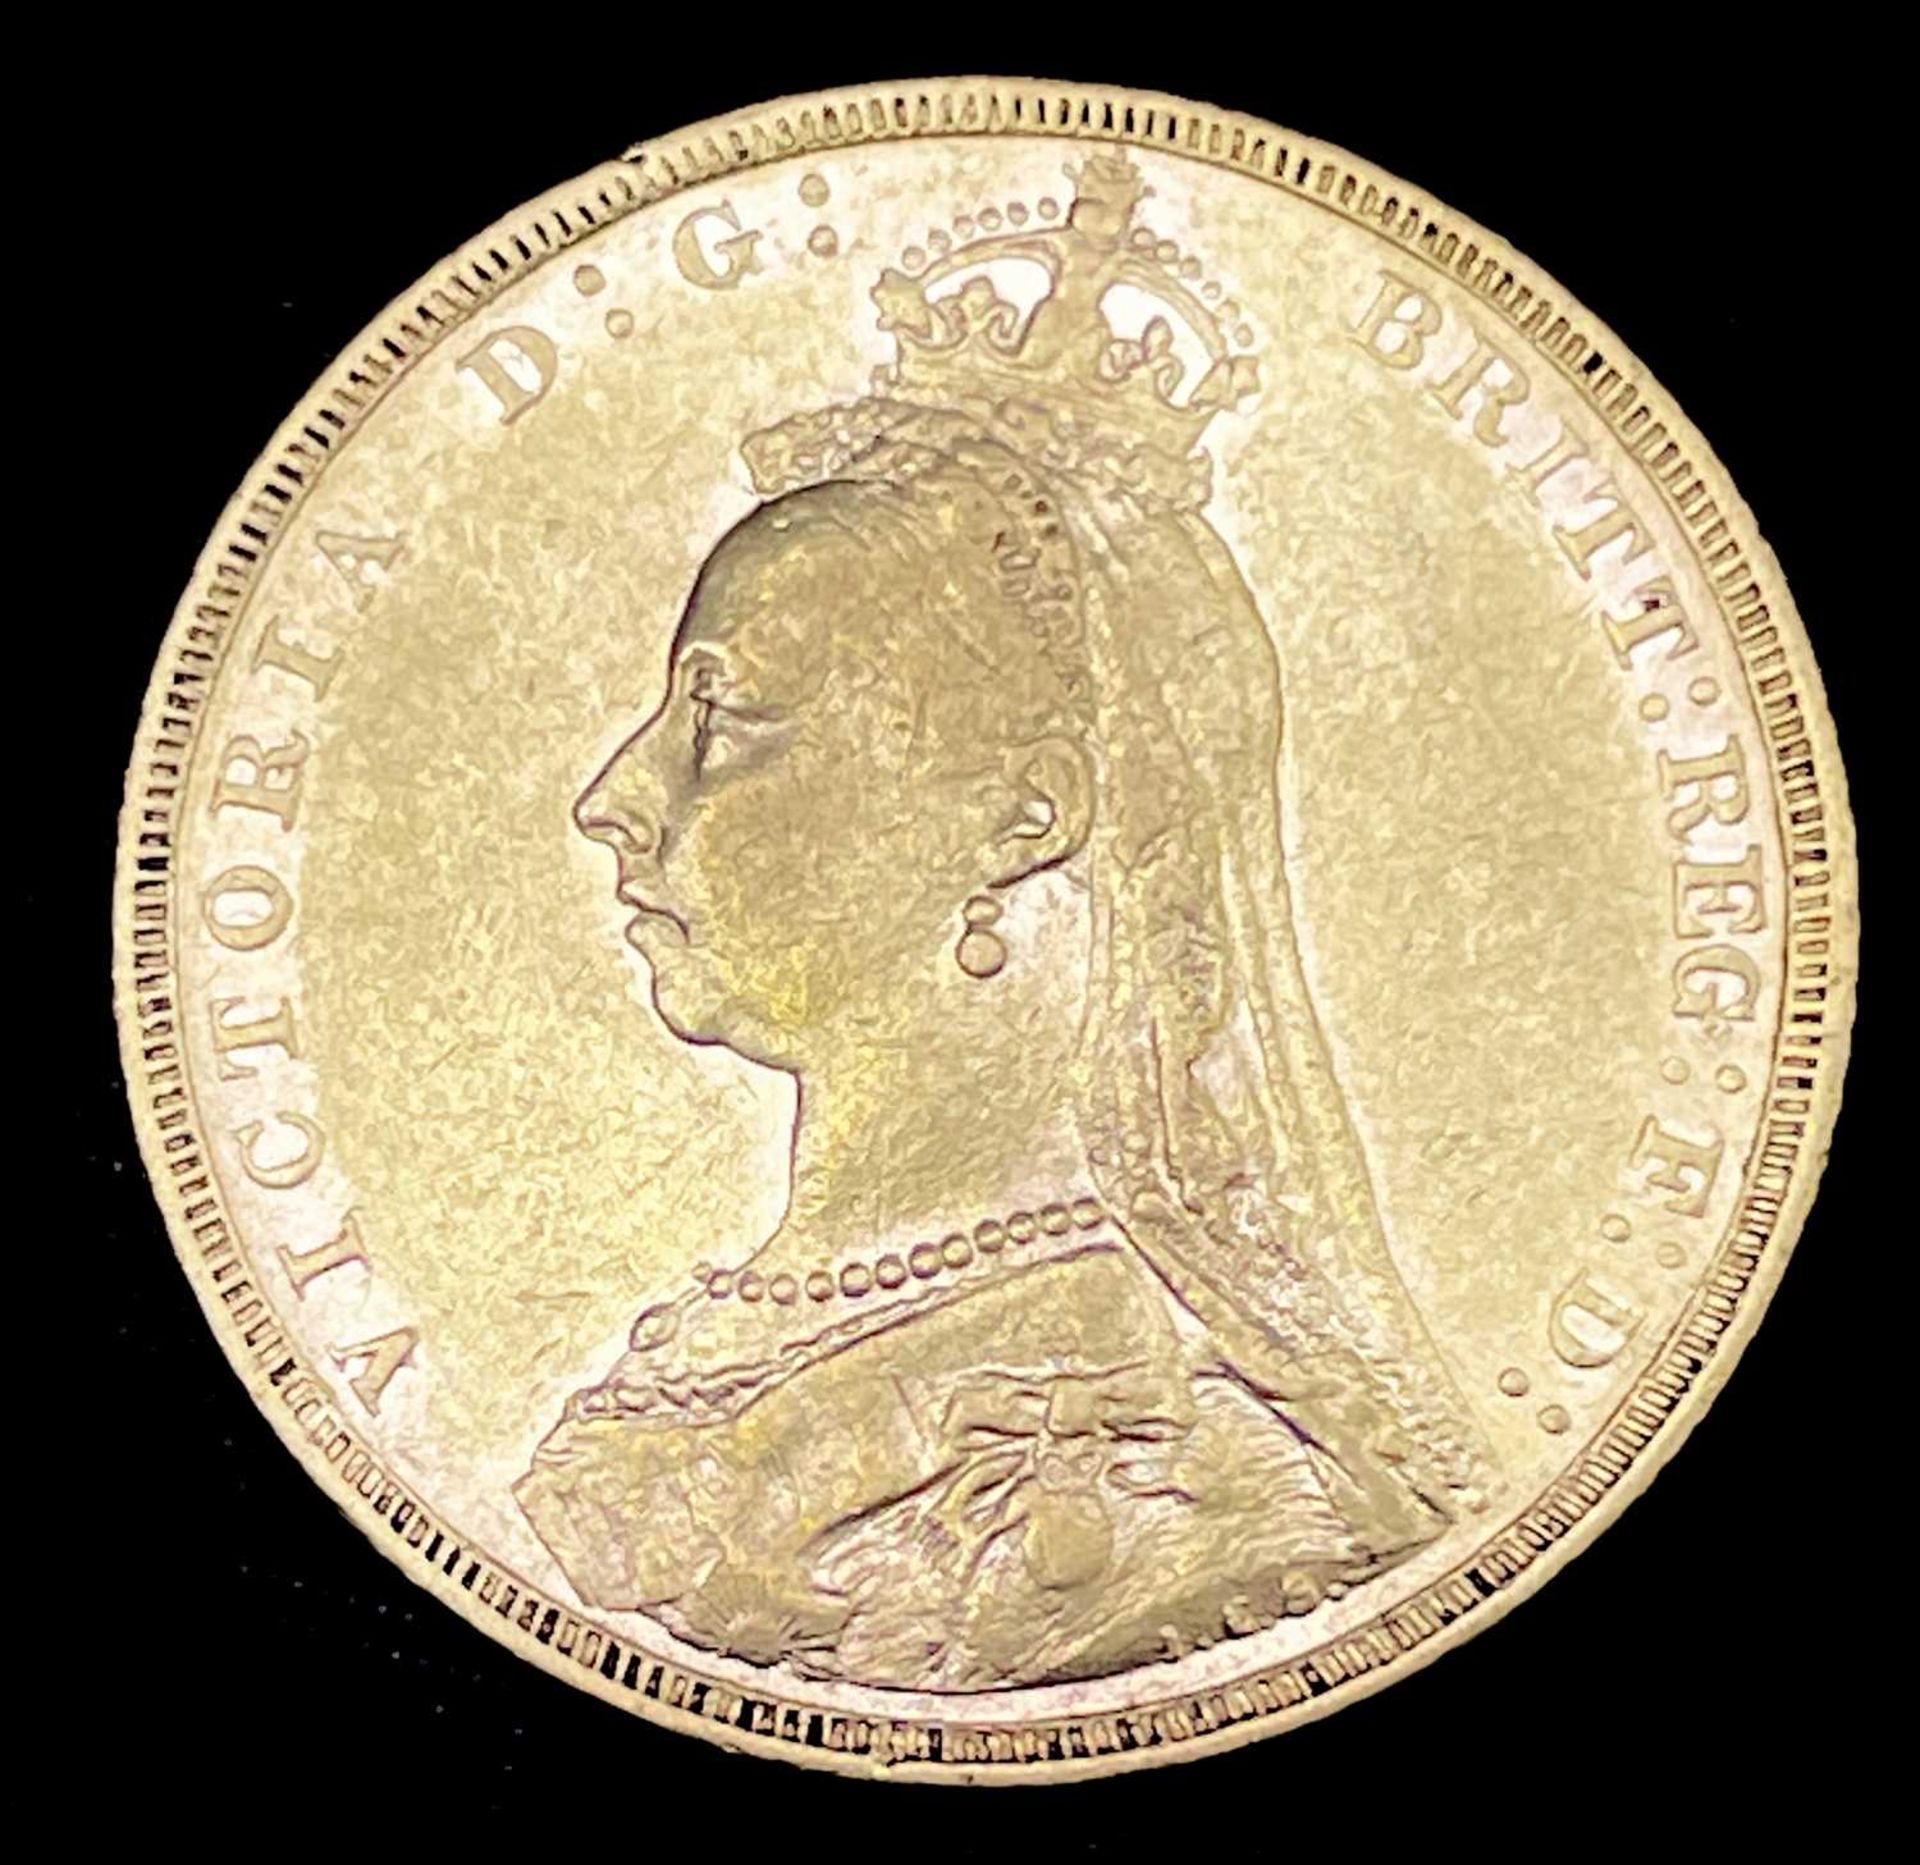 Great Britain Gold Sovereign 1889 Jubilee Head EF Note: Melbourne mint mark apparent Condition: